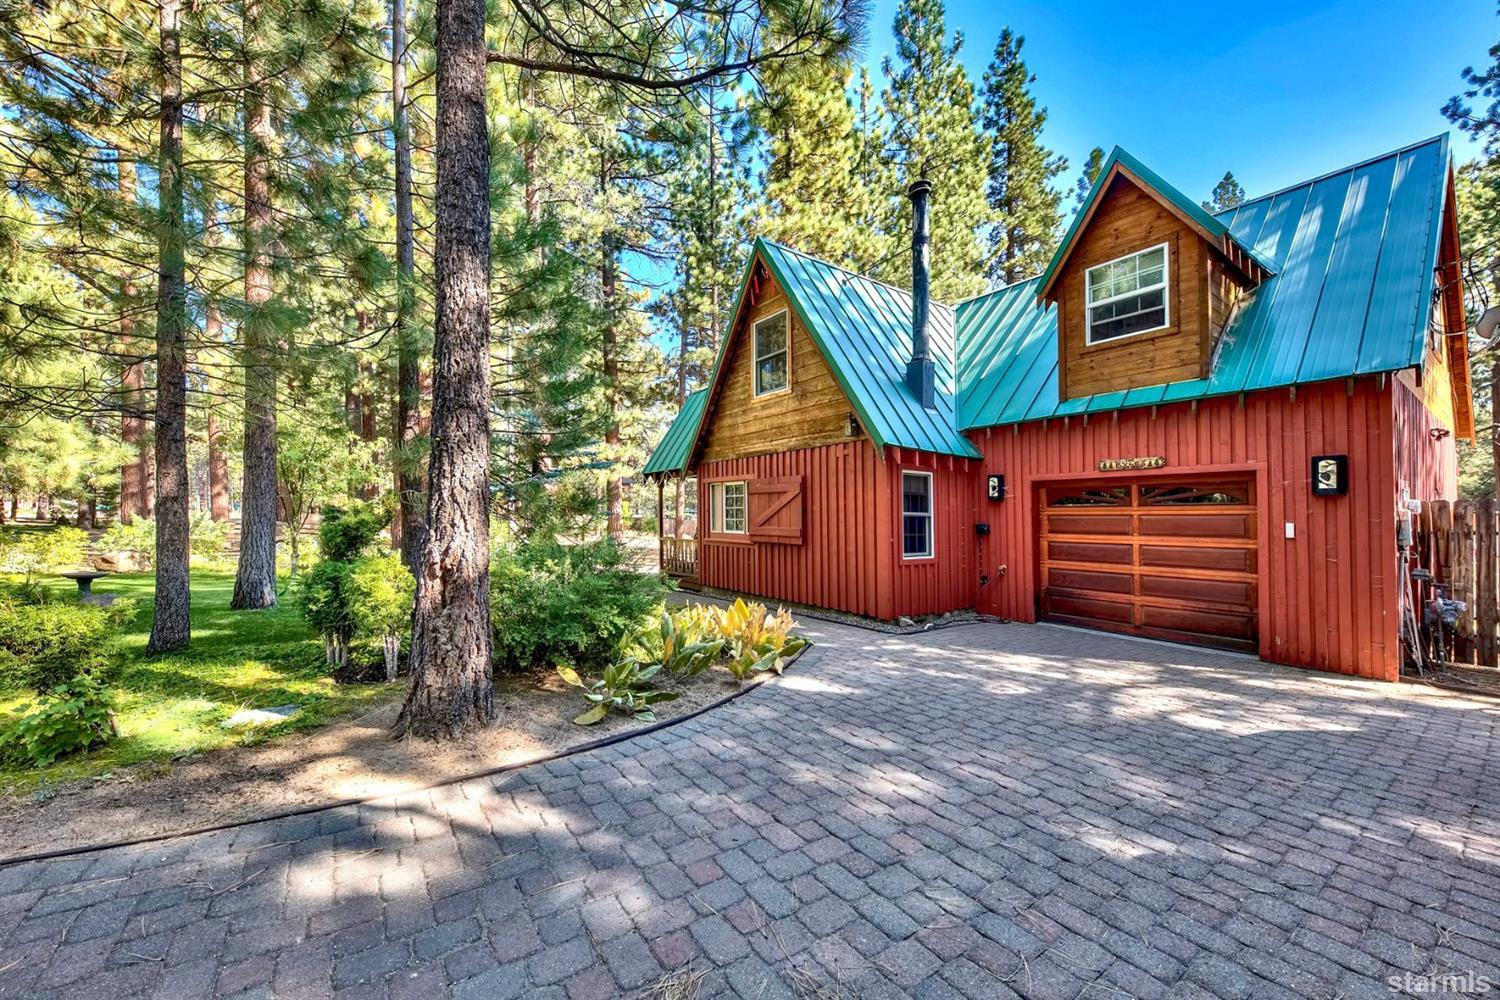 This is a Rare Find - A Cabin in the Woods within the historic Al Tahoe Forest Homes Association